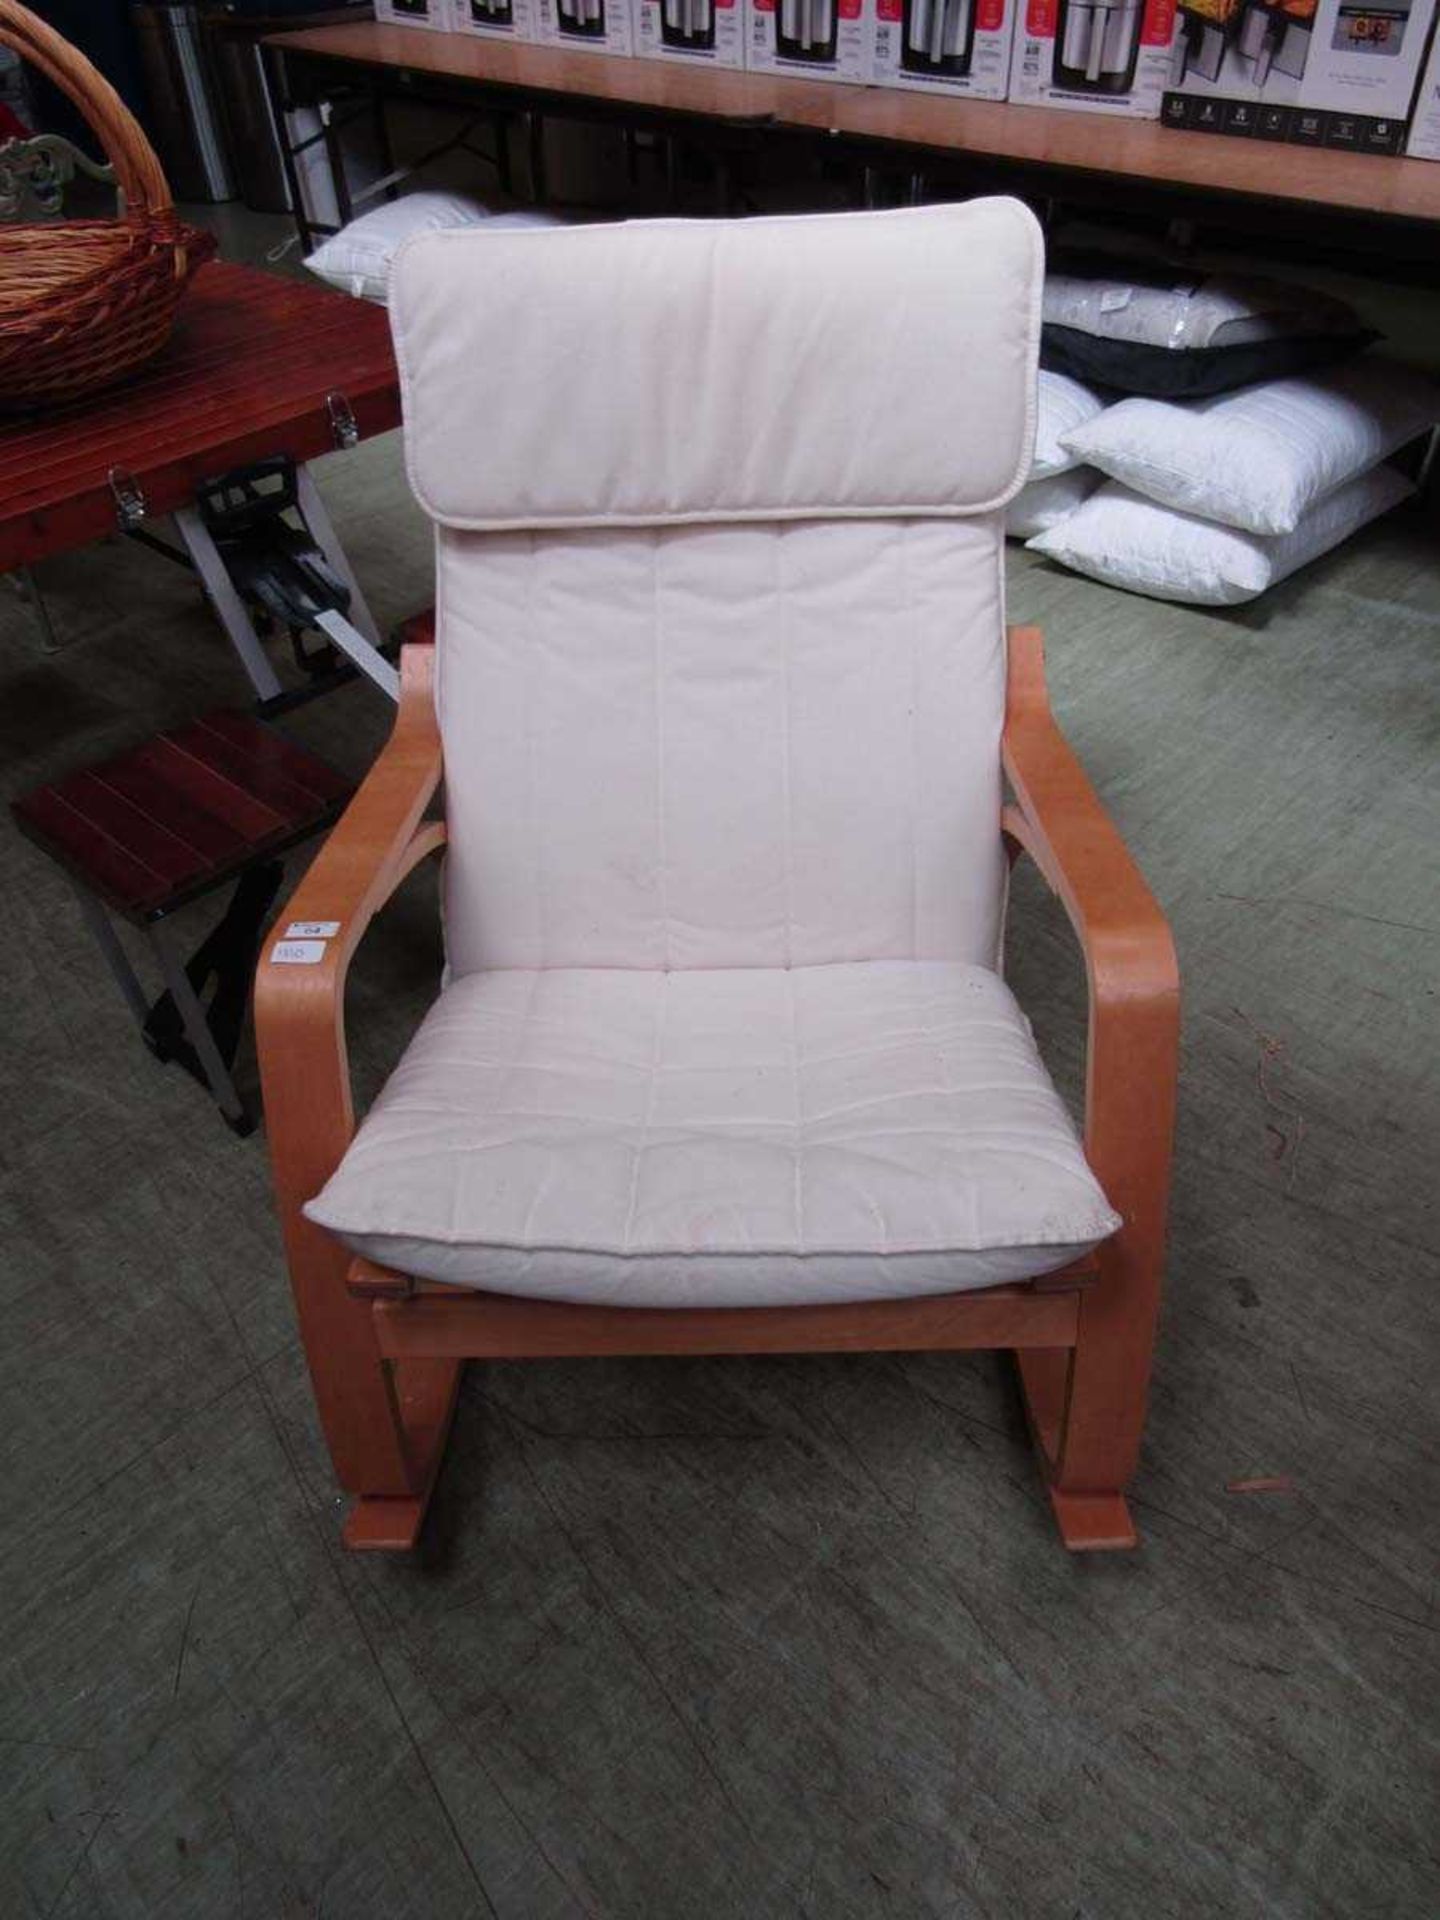 A modern bent wood style relaxing rocking chair